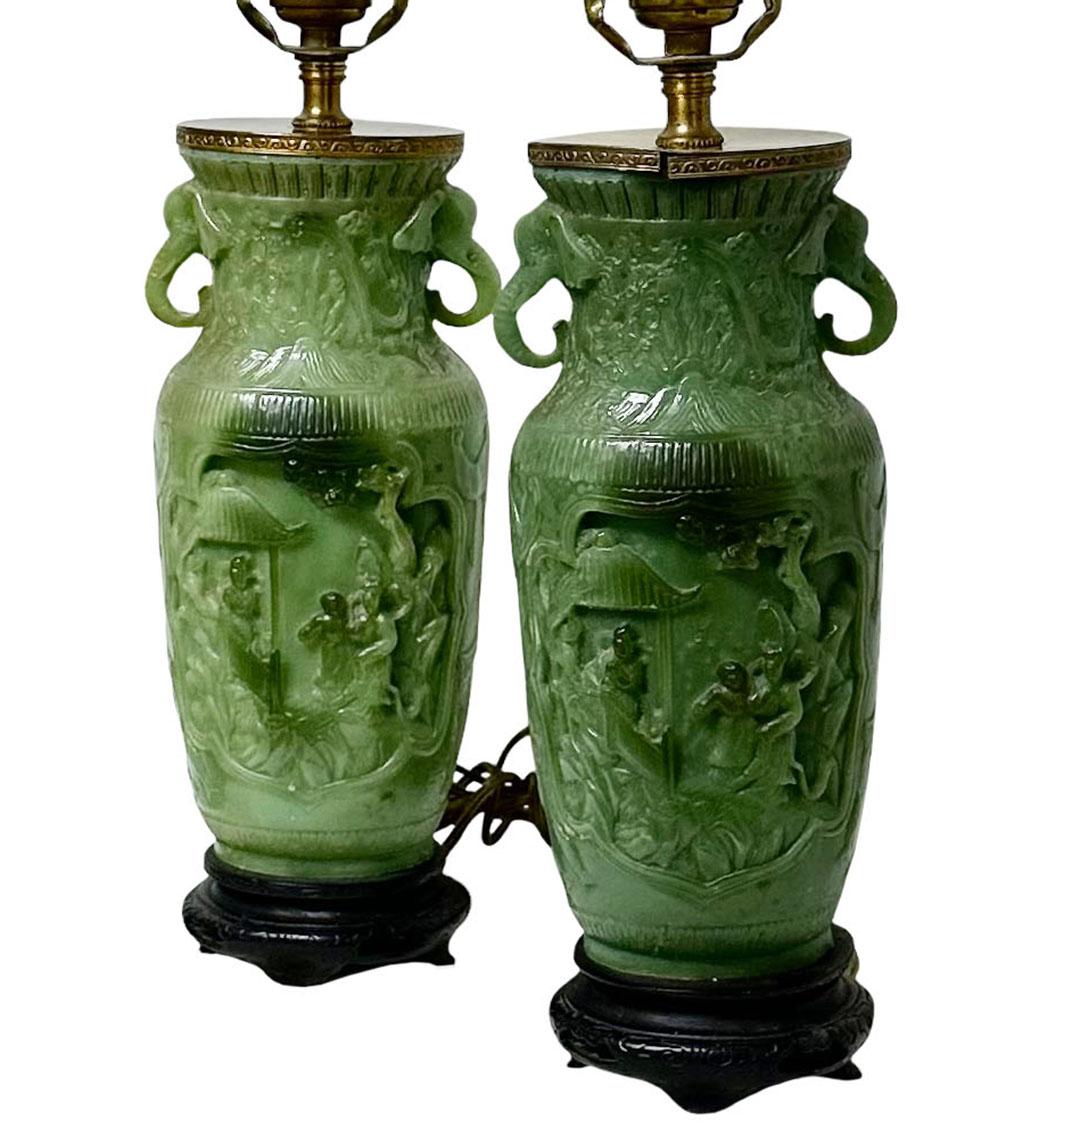 The pair of green lamps are not Jade they’re made to look like Jade and are in the Chinese taste. They are a composition that's beautifully done with elephants on the sides and a court scene in the middle. They are American made from the 1920s and